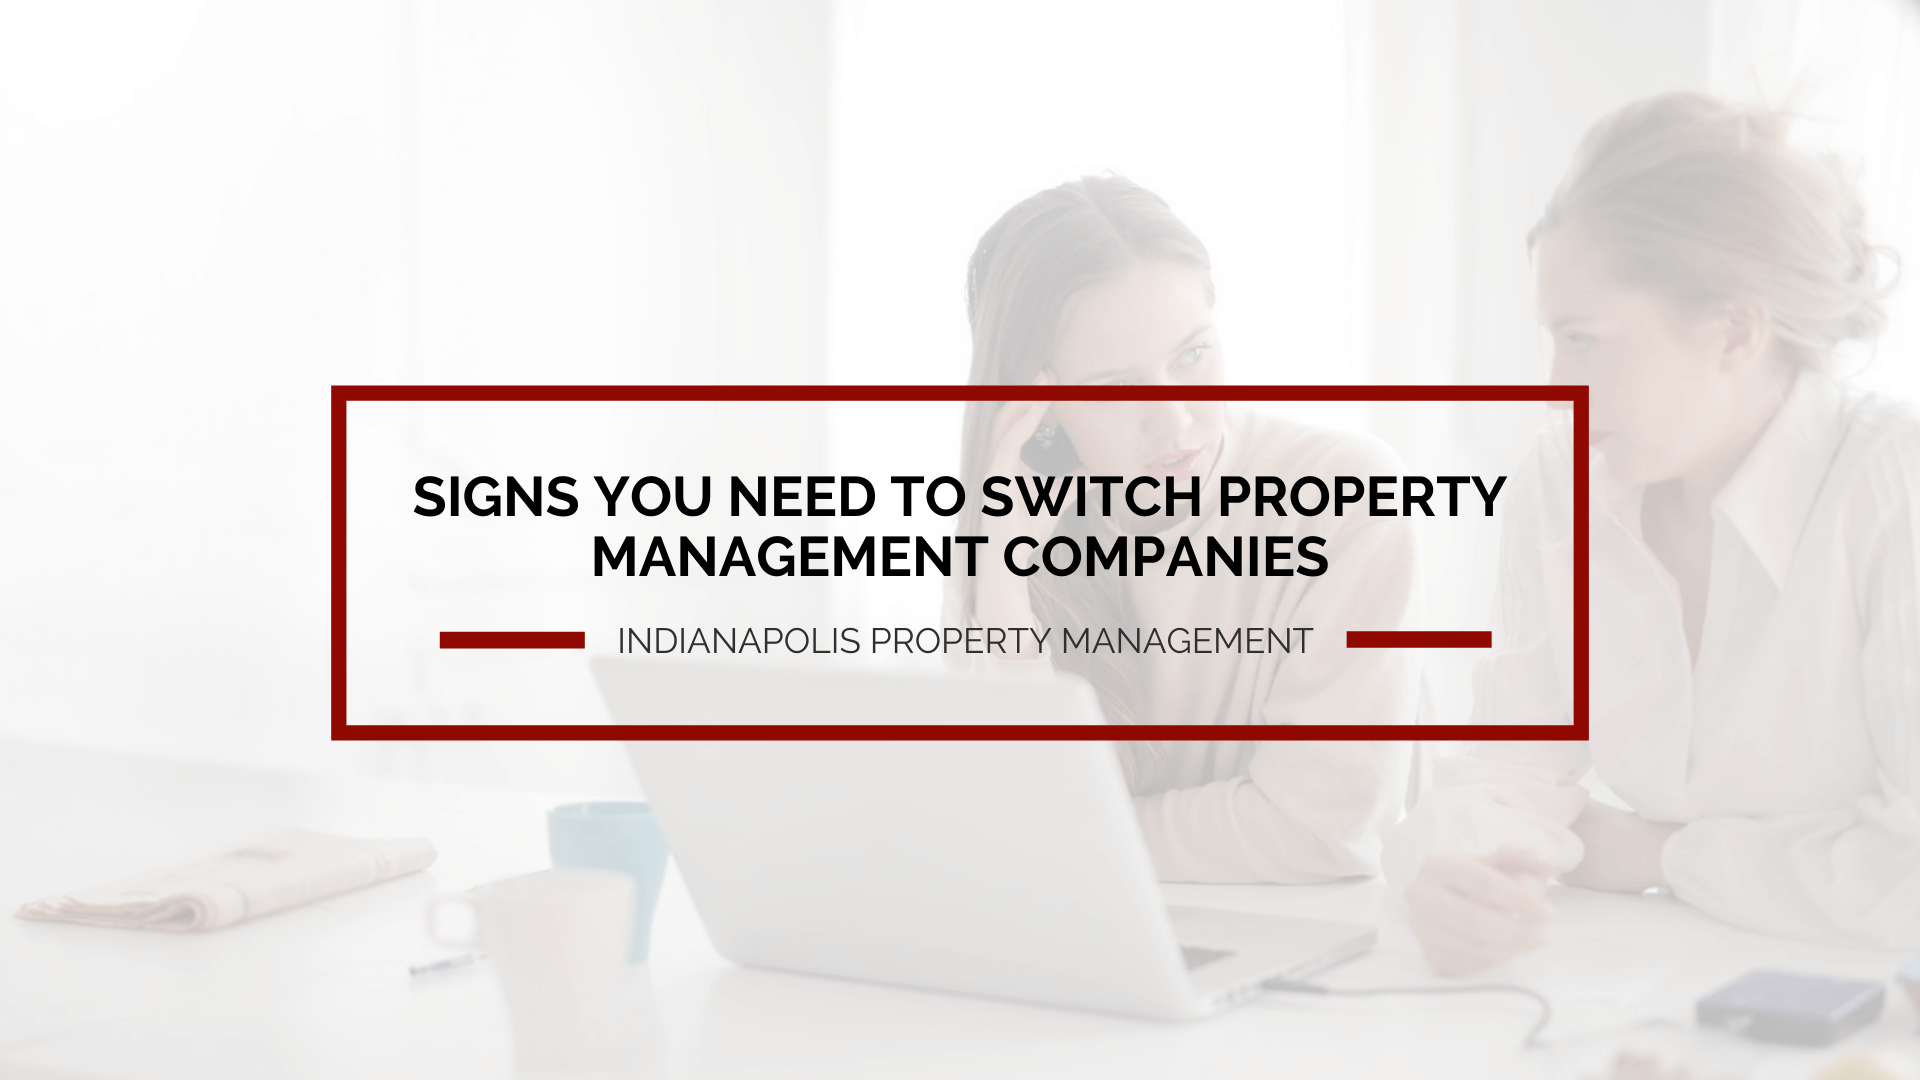 6 Signs You Need to Switch Property Management Companies for Your Indianapolis Rental Investment